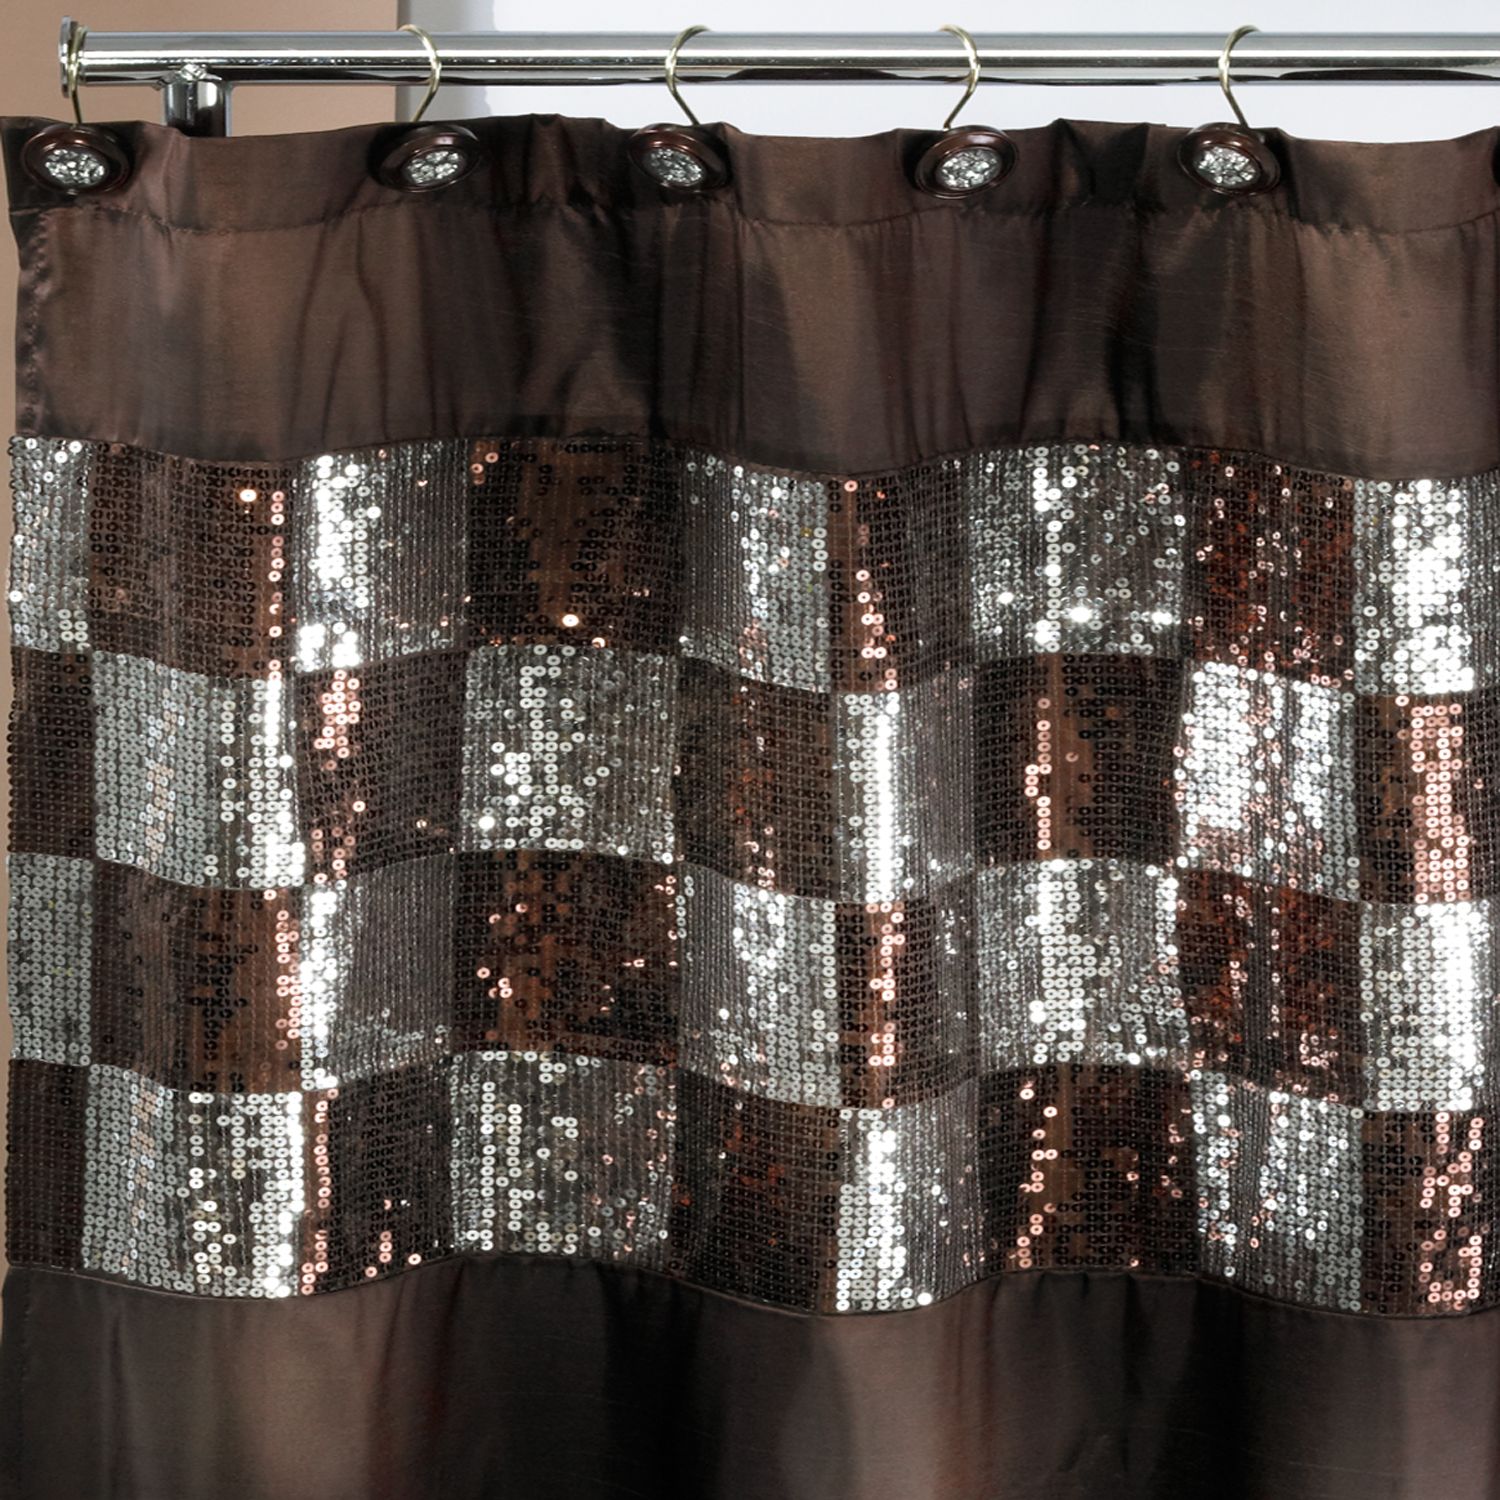 country bathroom curtains Shop for Shower Curtain Collections in the Bed & Bath department 